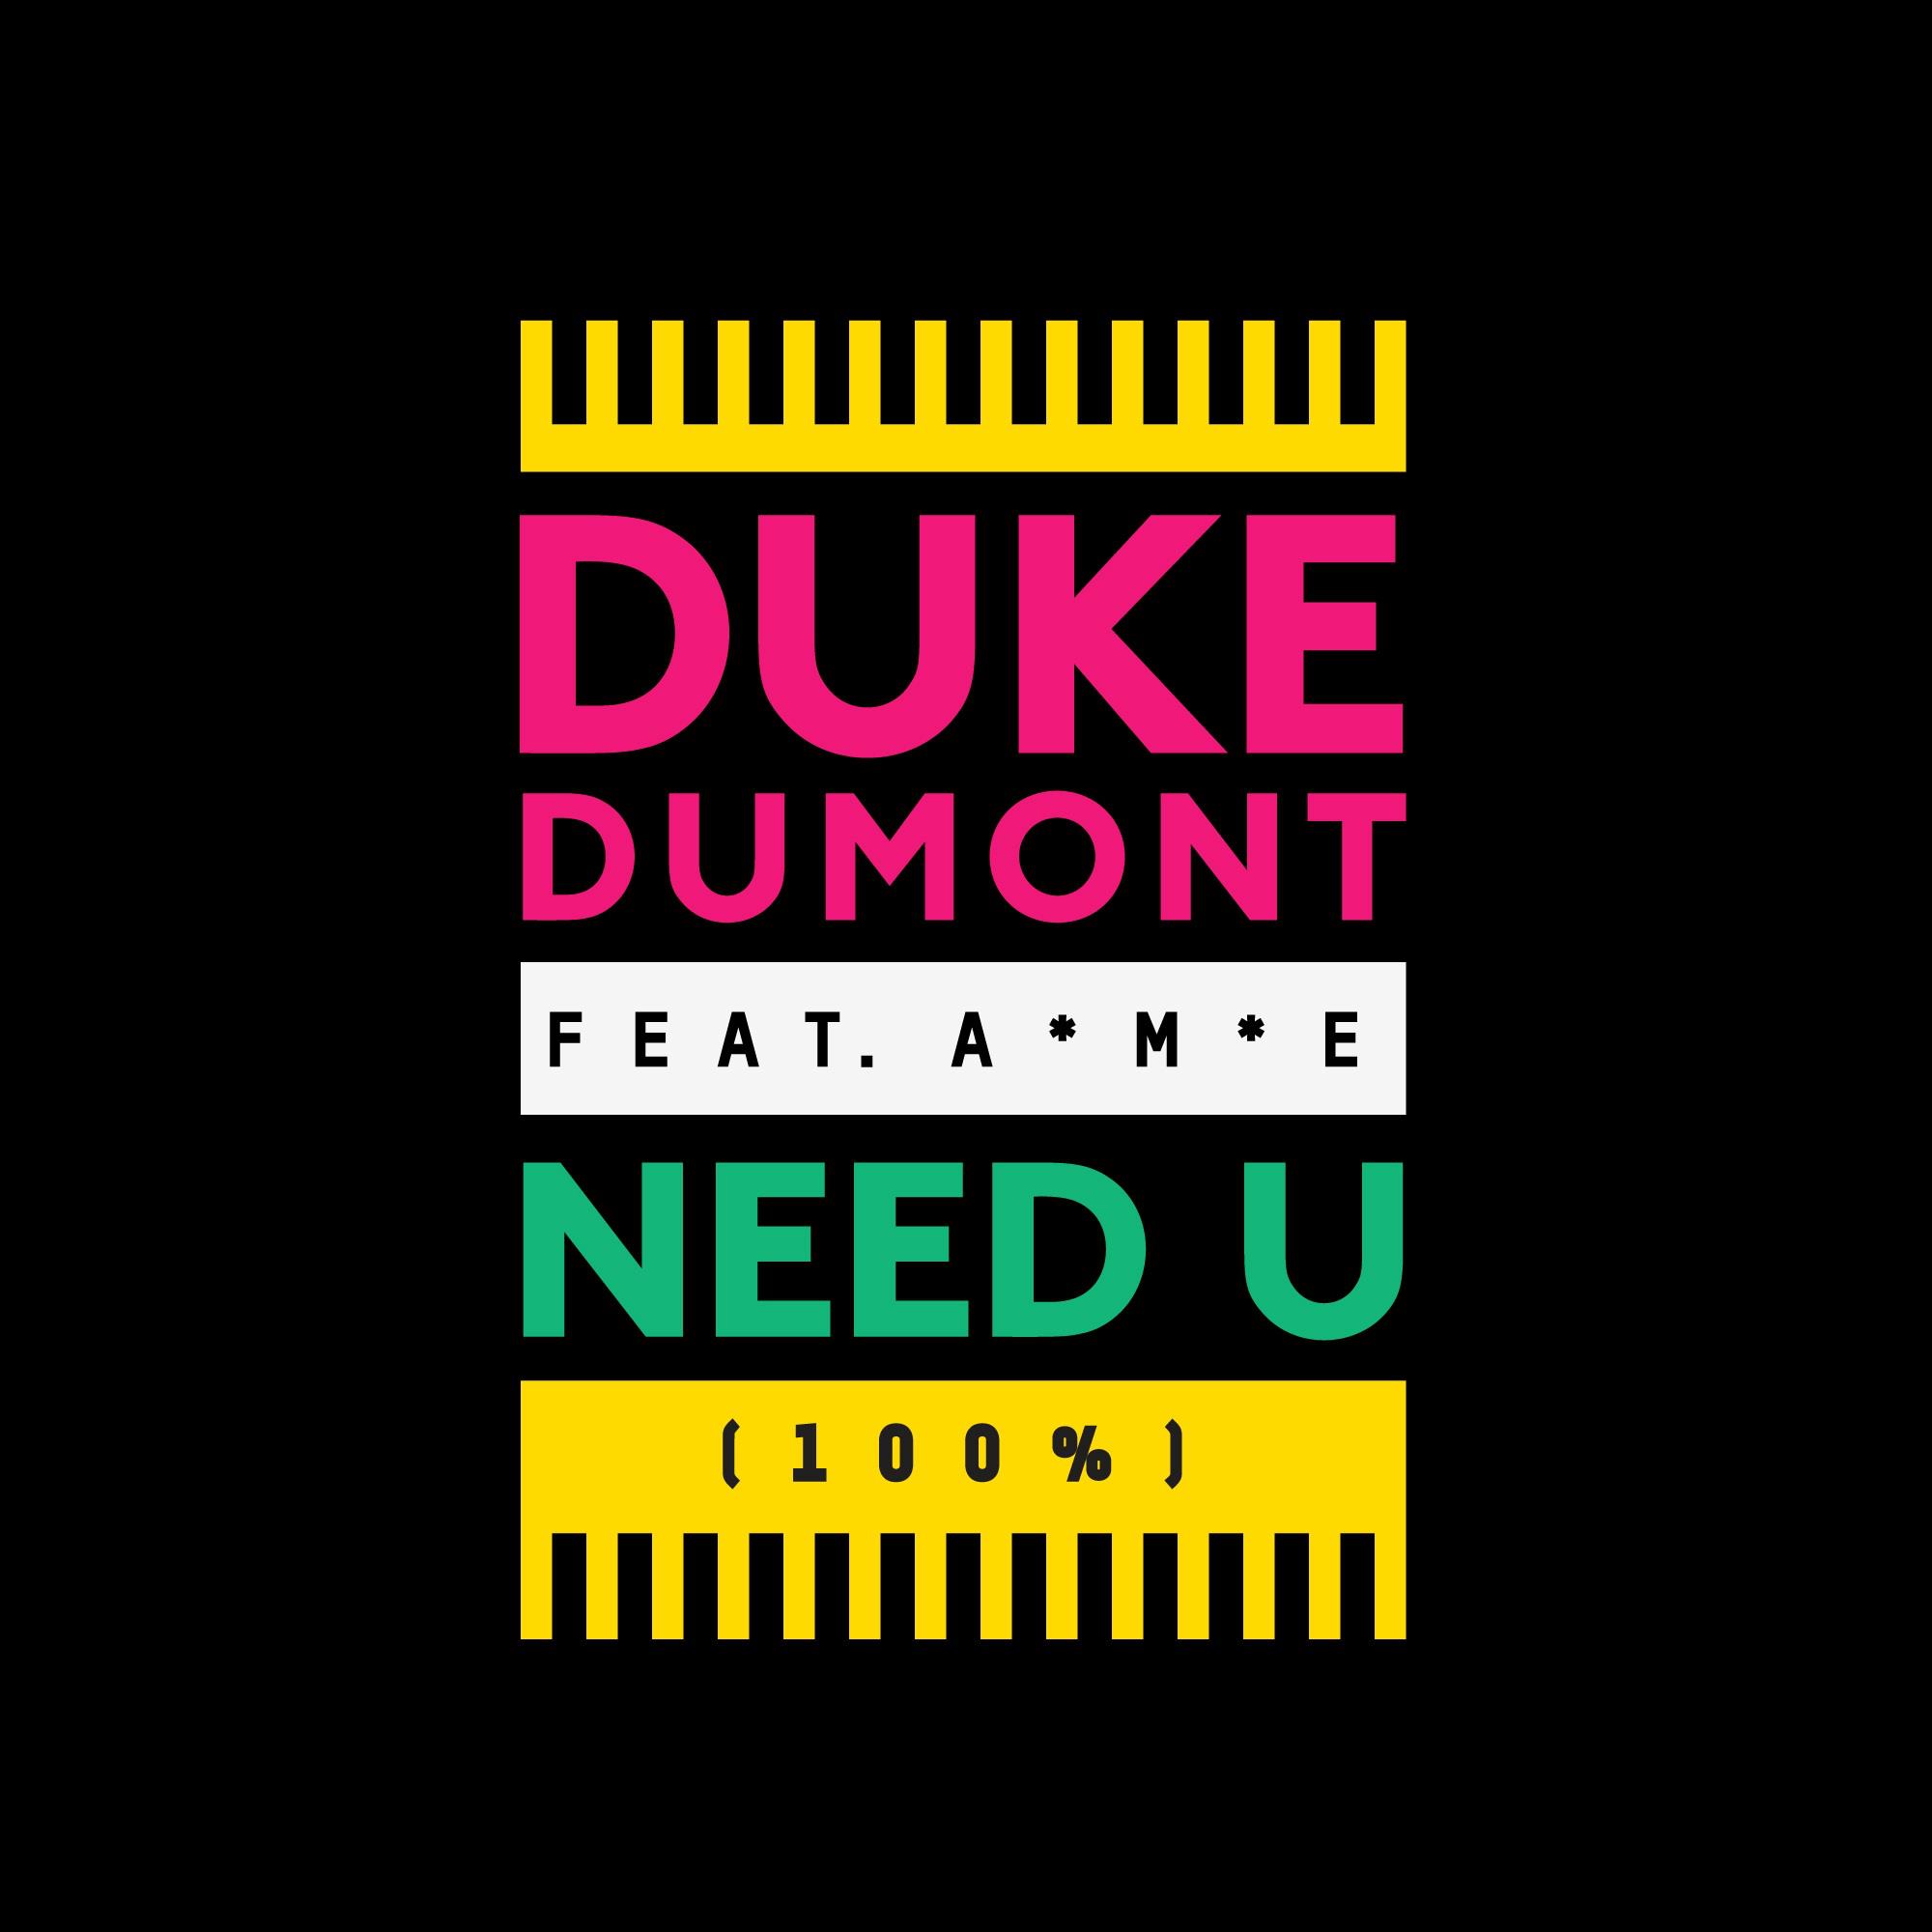 News Added Mar 29, 2013 "Need U (100%)" is a song by British Dance musician Duke Dumont featuring vocals from singer-songwriter A*M*E. It will be released as a digital download in the United Kingdom on 31 March 2013. The song has charted in the Netherlands. The song was written by A*M*E, MNEK and produced by […]